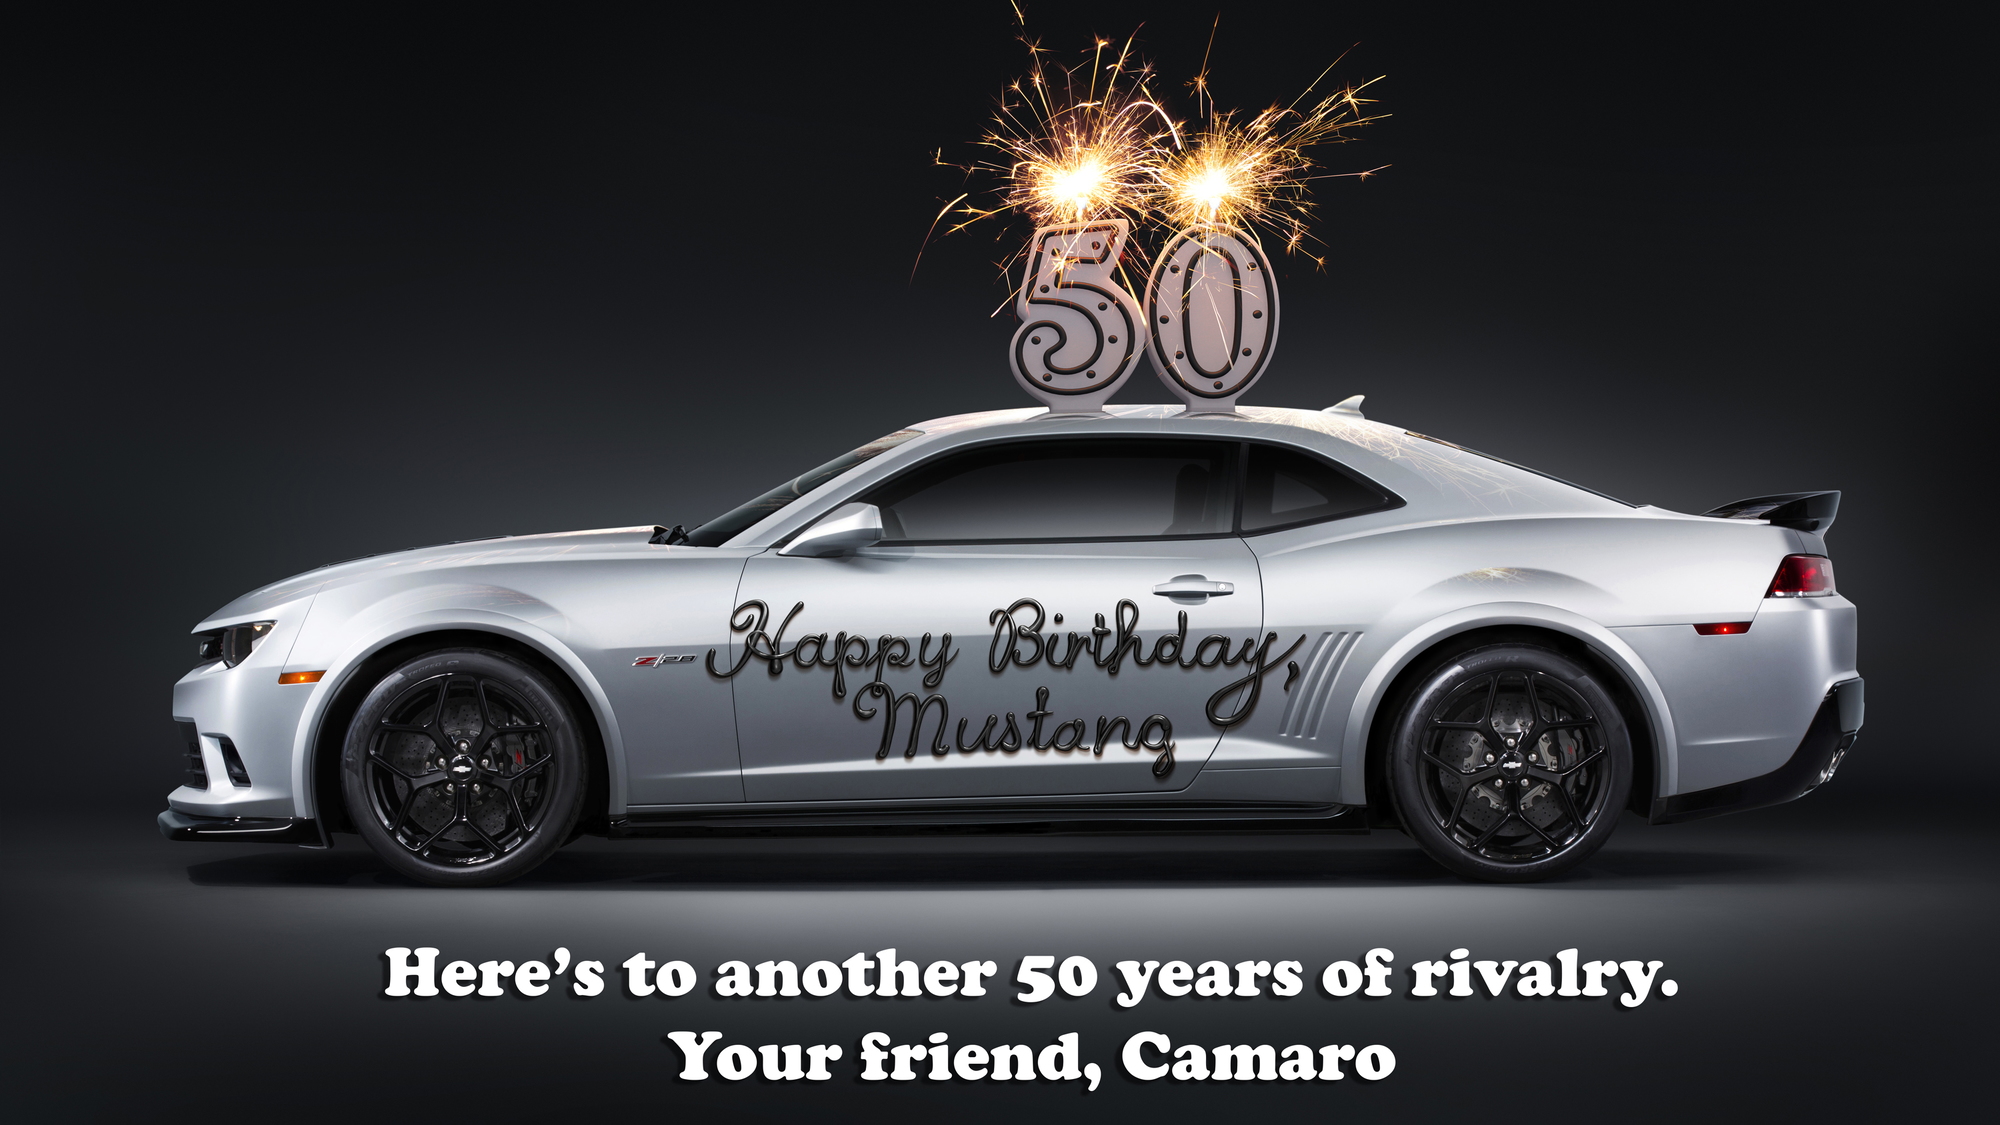 Chevrolet salutes 50 years of the Ford Mustang